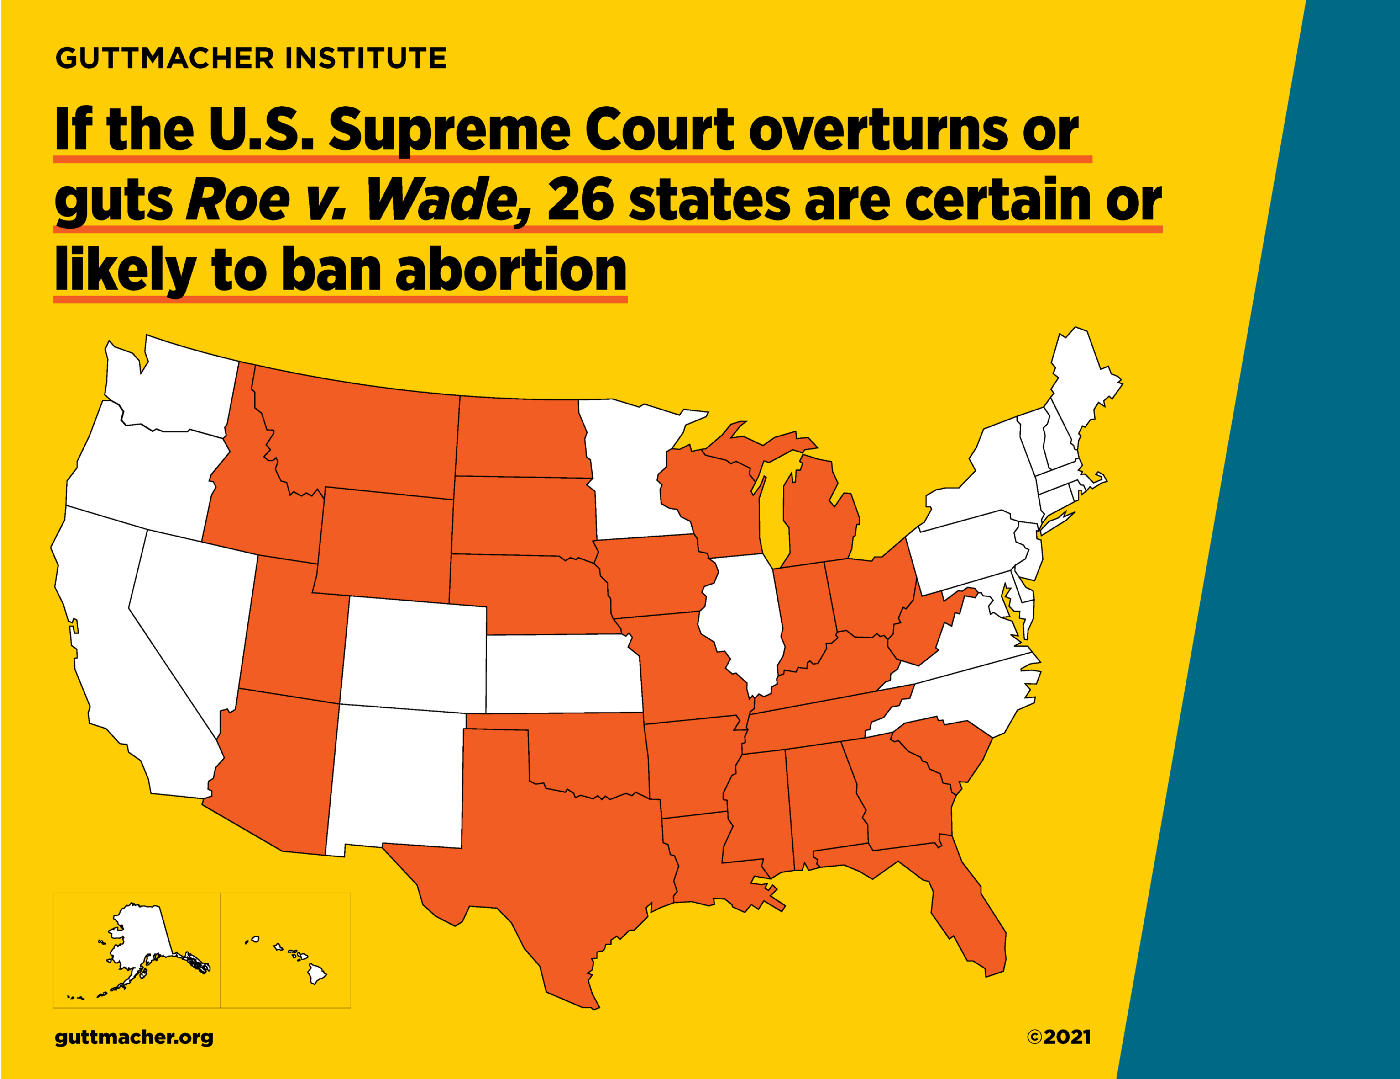 Graphic by the Guttmacher Institute. Text reads: If the U.S. Supreme Court overturns or guts Roe v. Wade, 26 states are certain or likely to ban abortion. Image of the United States shows the following states highlighted in orange: ID, UT, AZ, MT, WY, ND, SD, NE, OK, TX, IA, MO, AR, LA, WI, MI, IN, KY, TN, MS, AL, OH, WY, SC, GA, and FL.